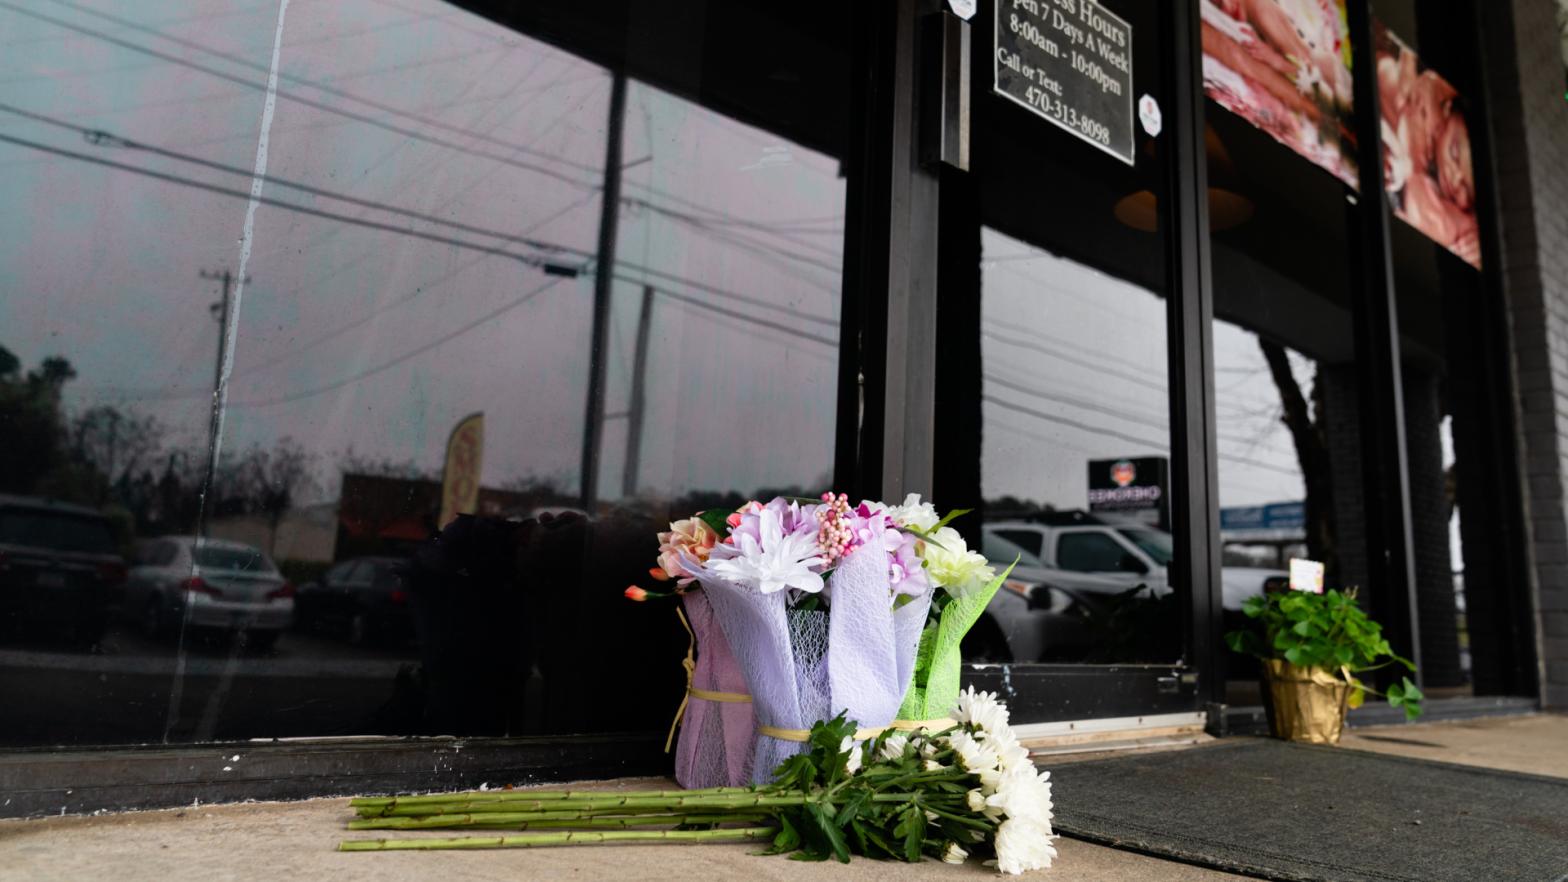 Flowers left outside the scene of the shooting that left four dead in Atlanta, Georgia. (Photo: Elijah Nouvelage, Getty Images)